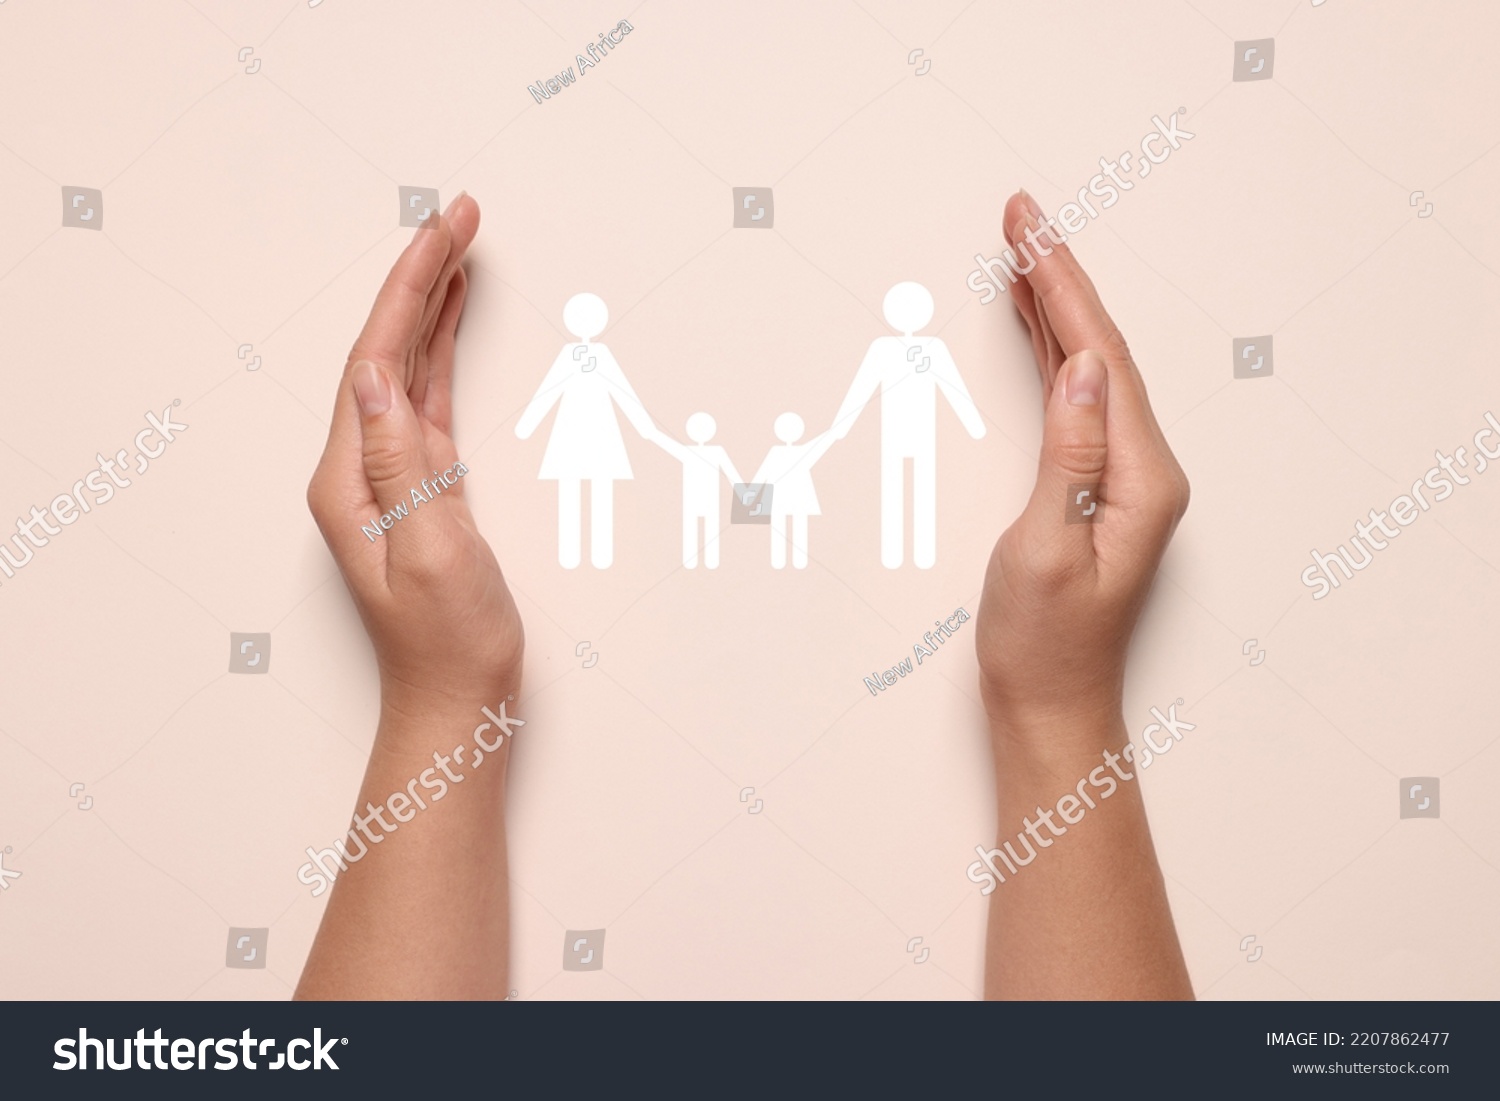 Woman holding hands around paper silhouette of family on light pink background, top view. Insurance concept #2207862477